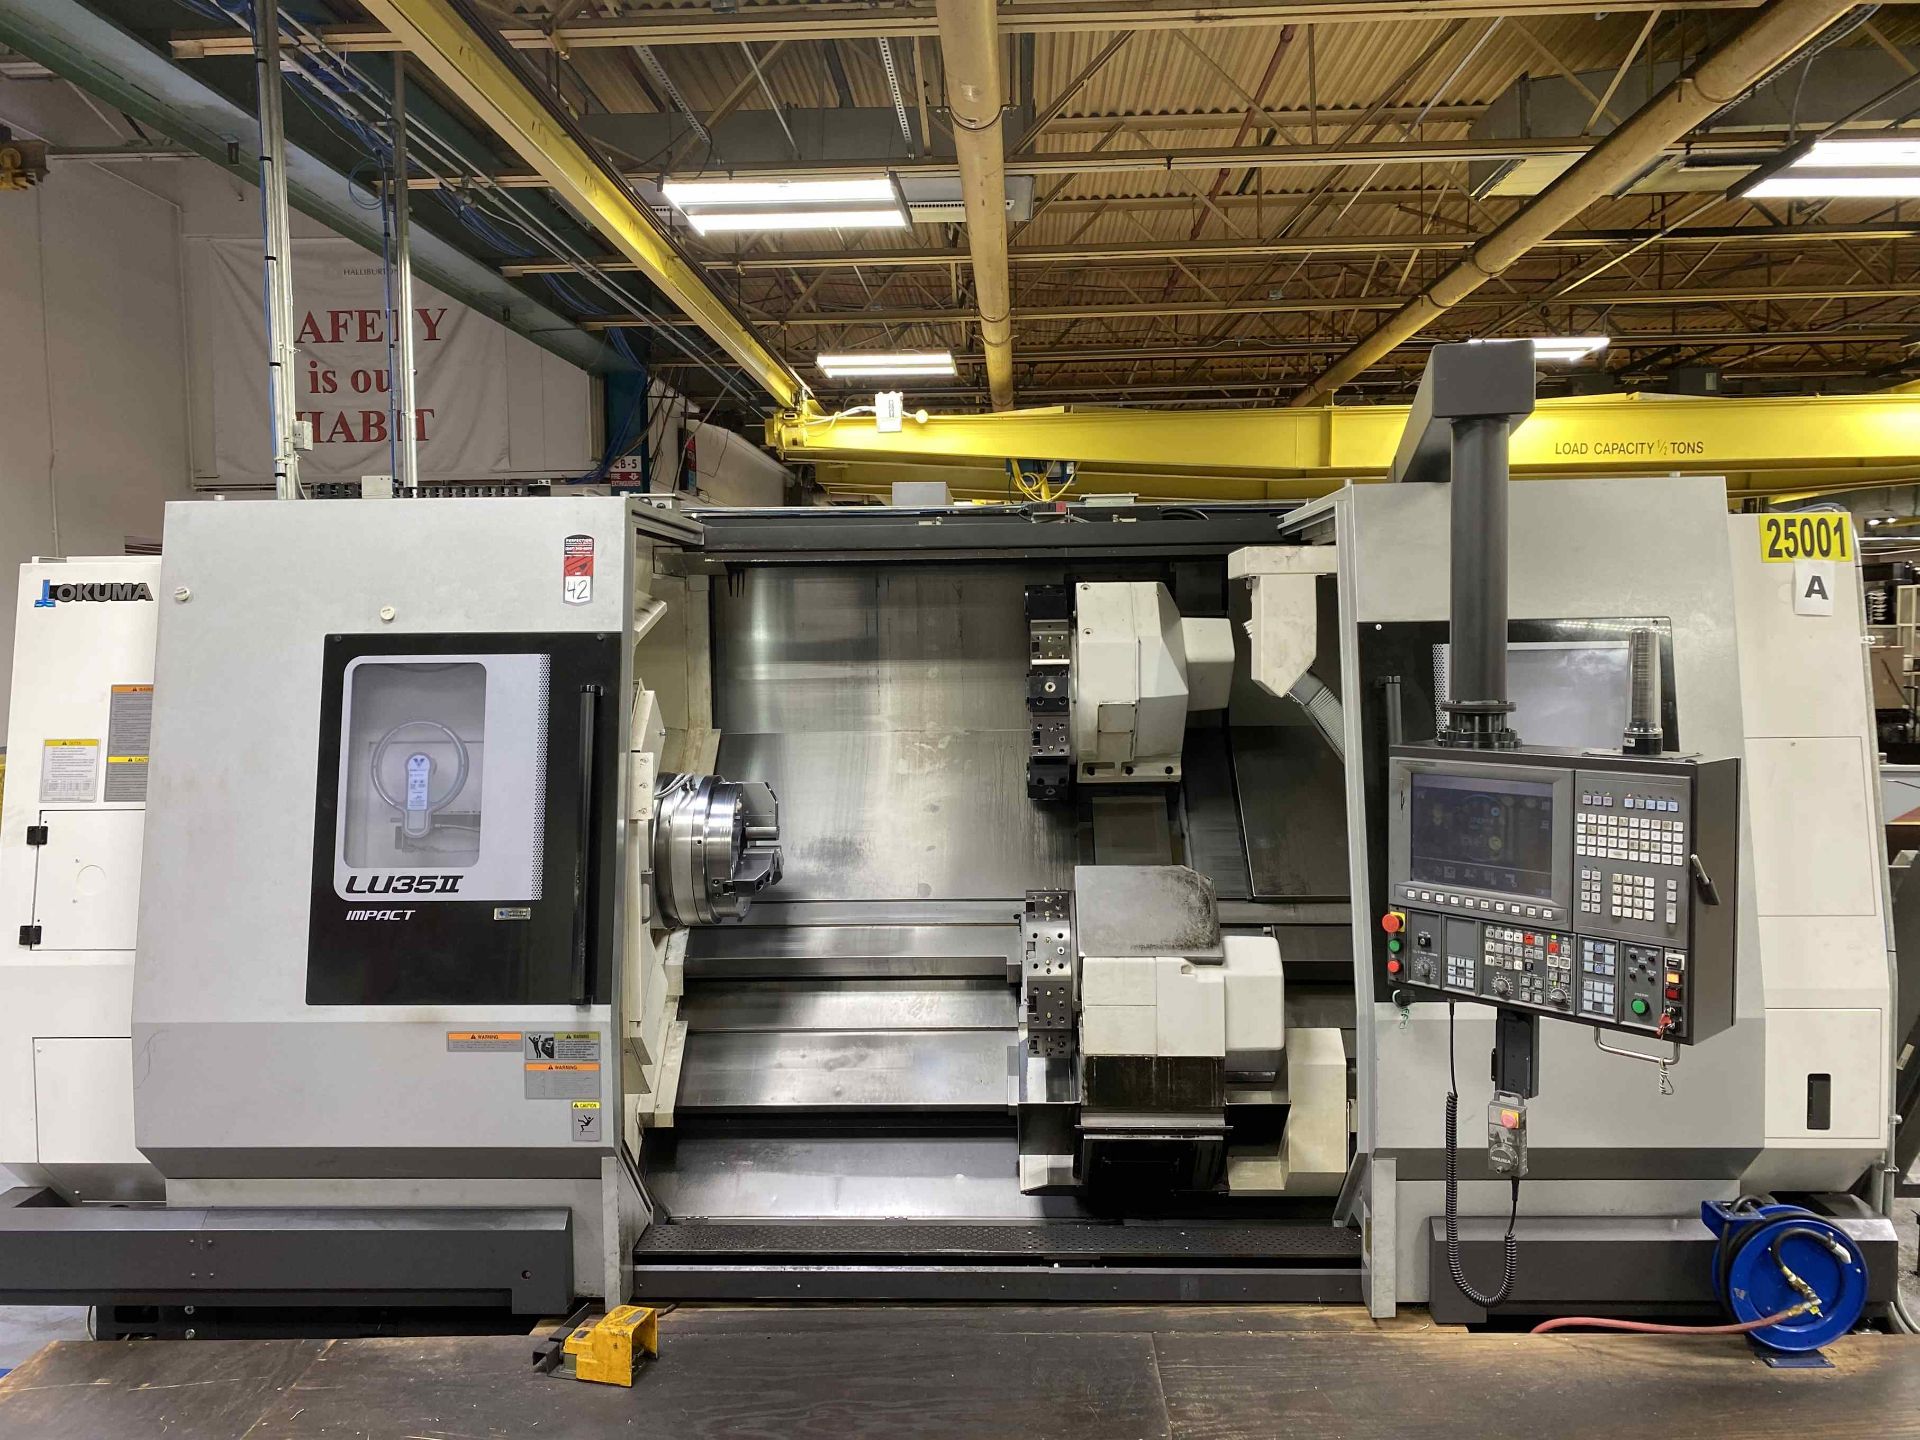 2015 OKUMA LU35II ST1500 Turning Center, s/n 189280, w/ OSP-P300L Control (NO TOOLING INCLUDED) - Image 2 of 9